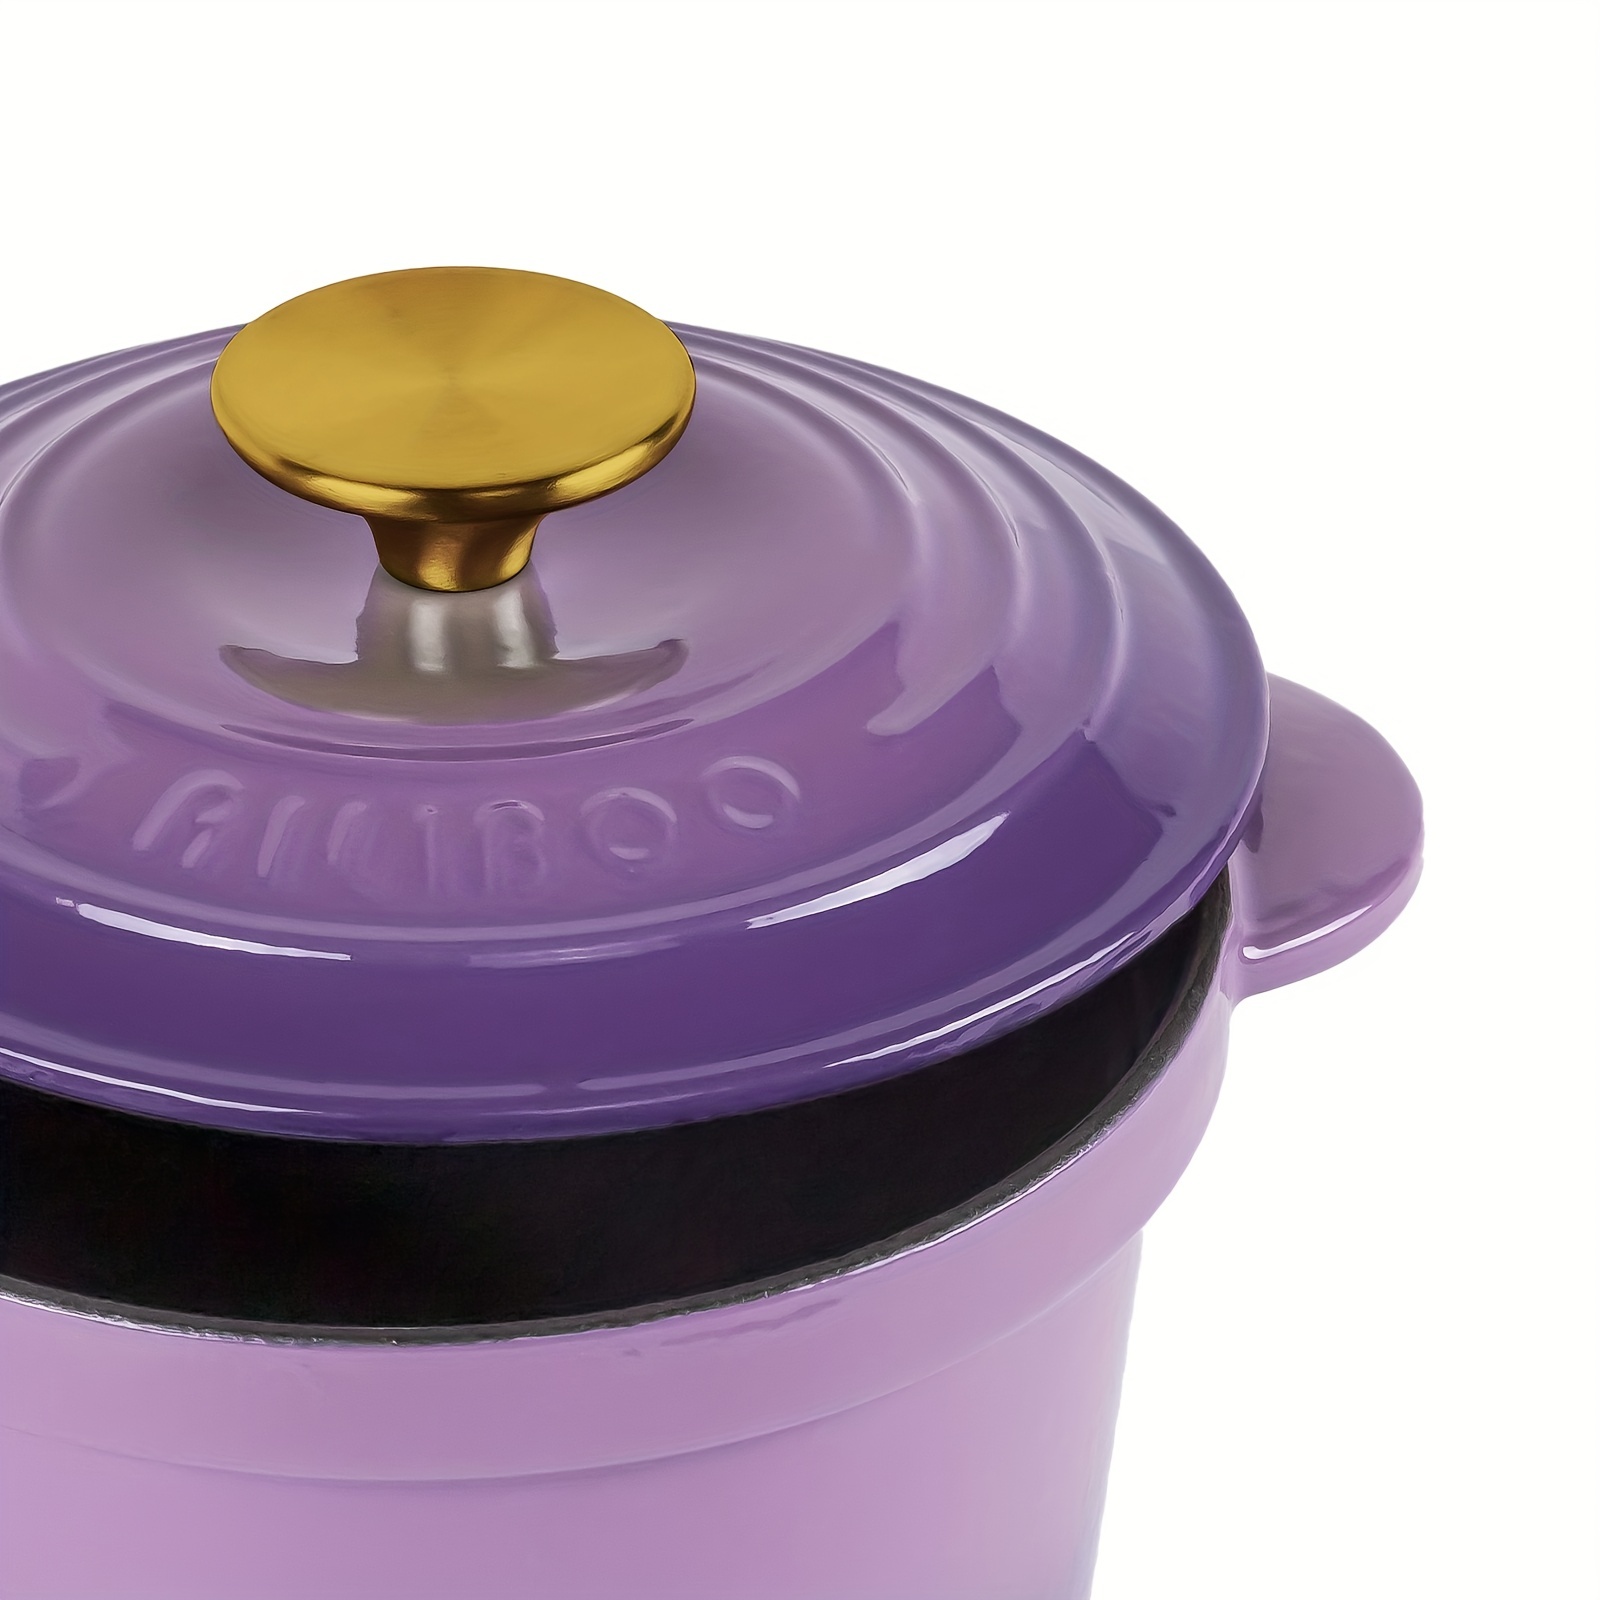  BAMFY Enameled Cast Iron Dutch Oven Pot with Lid Pumpkin  Stockpot Non-stick Enamel Coated Casserole for Cooking, Baking, Stewing,  Roasting (Color : Purple): Home & Kitchen